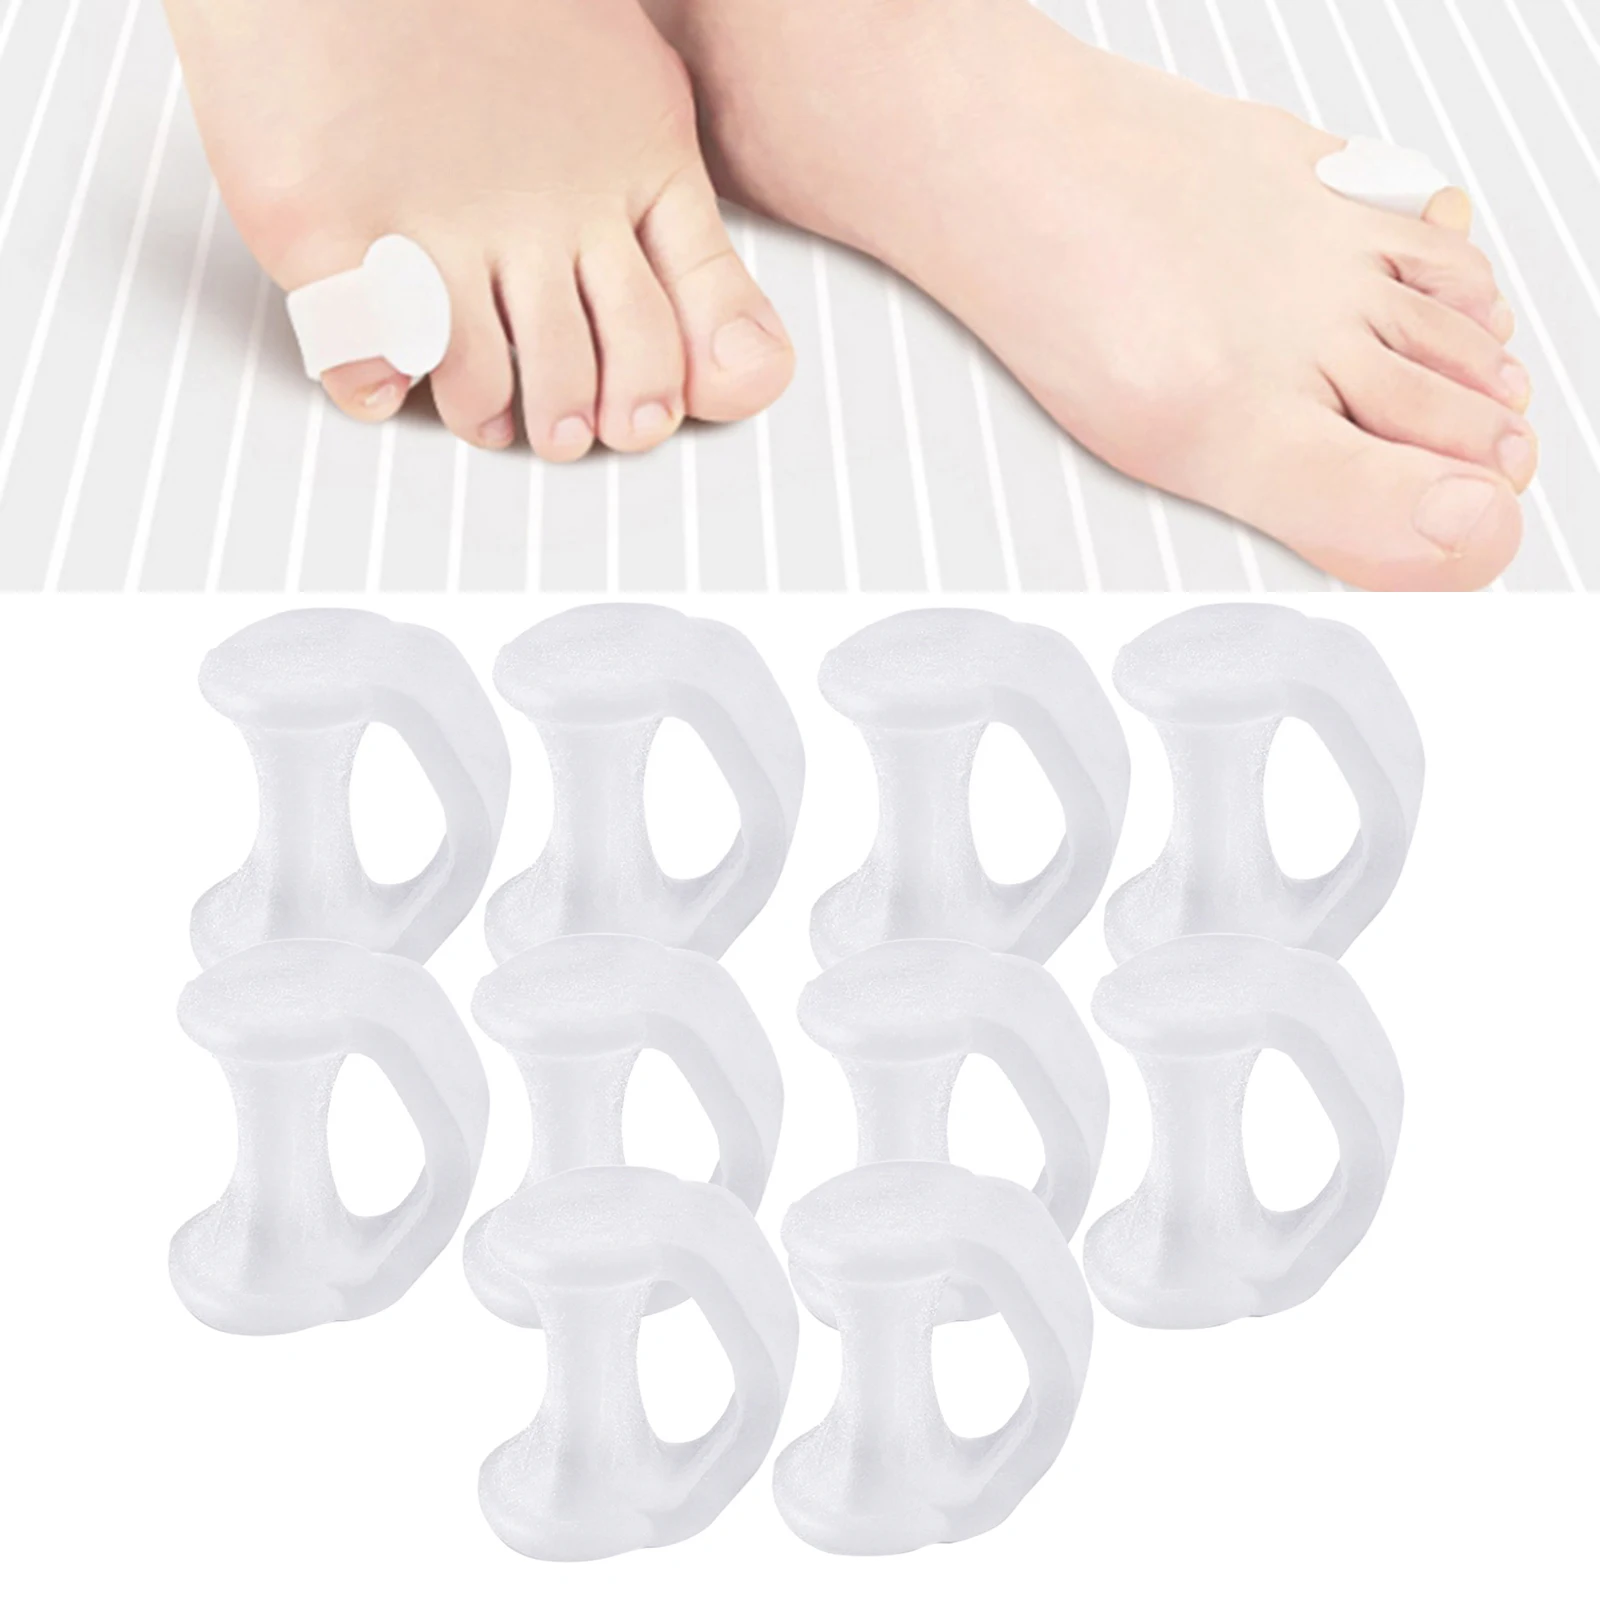 5 Pairs of Soft Sleeves Pinky Toe Corrector Toe Separators for Overlapping Ze